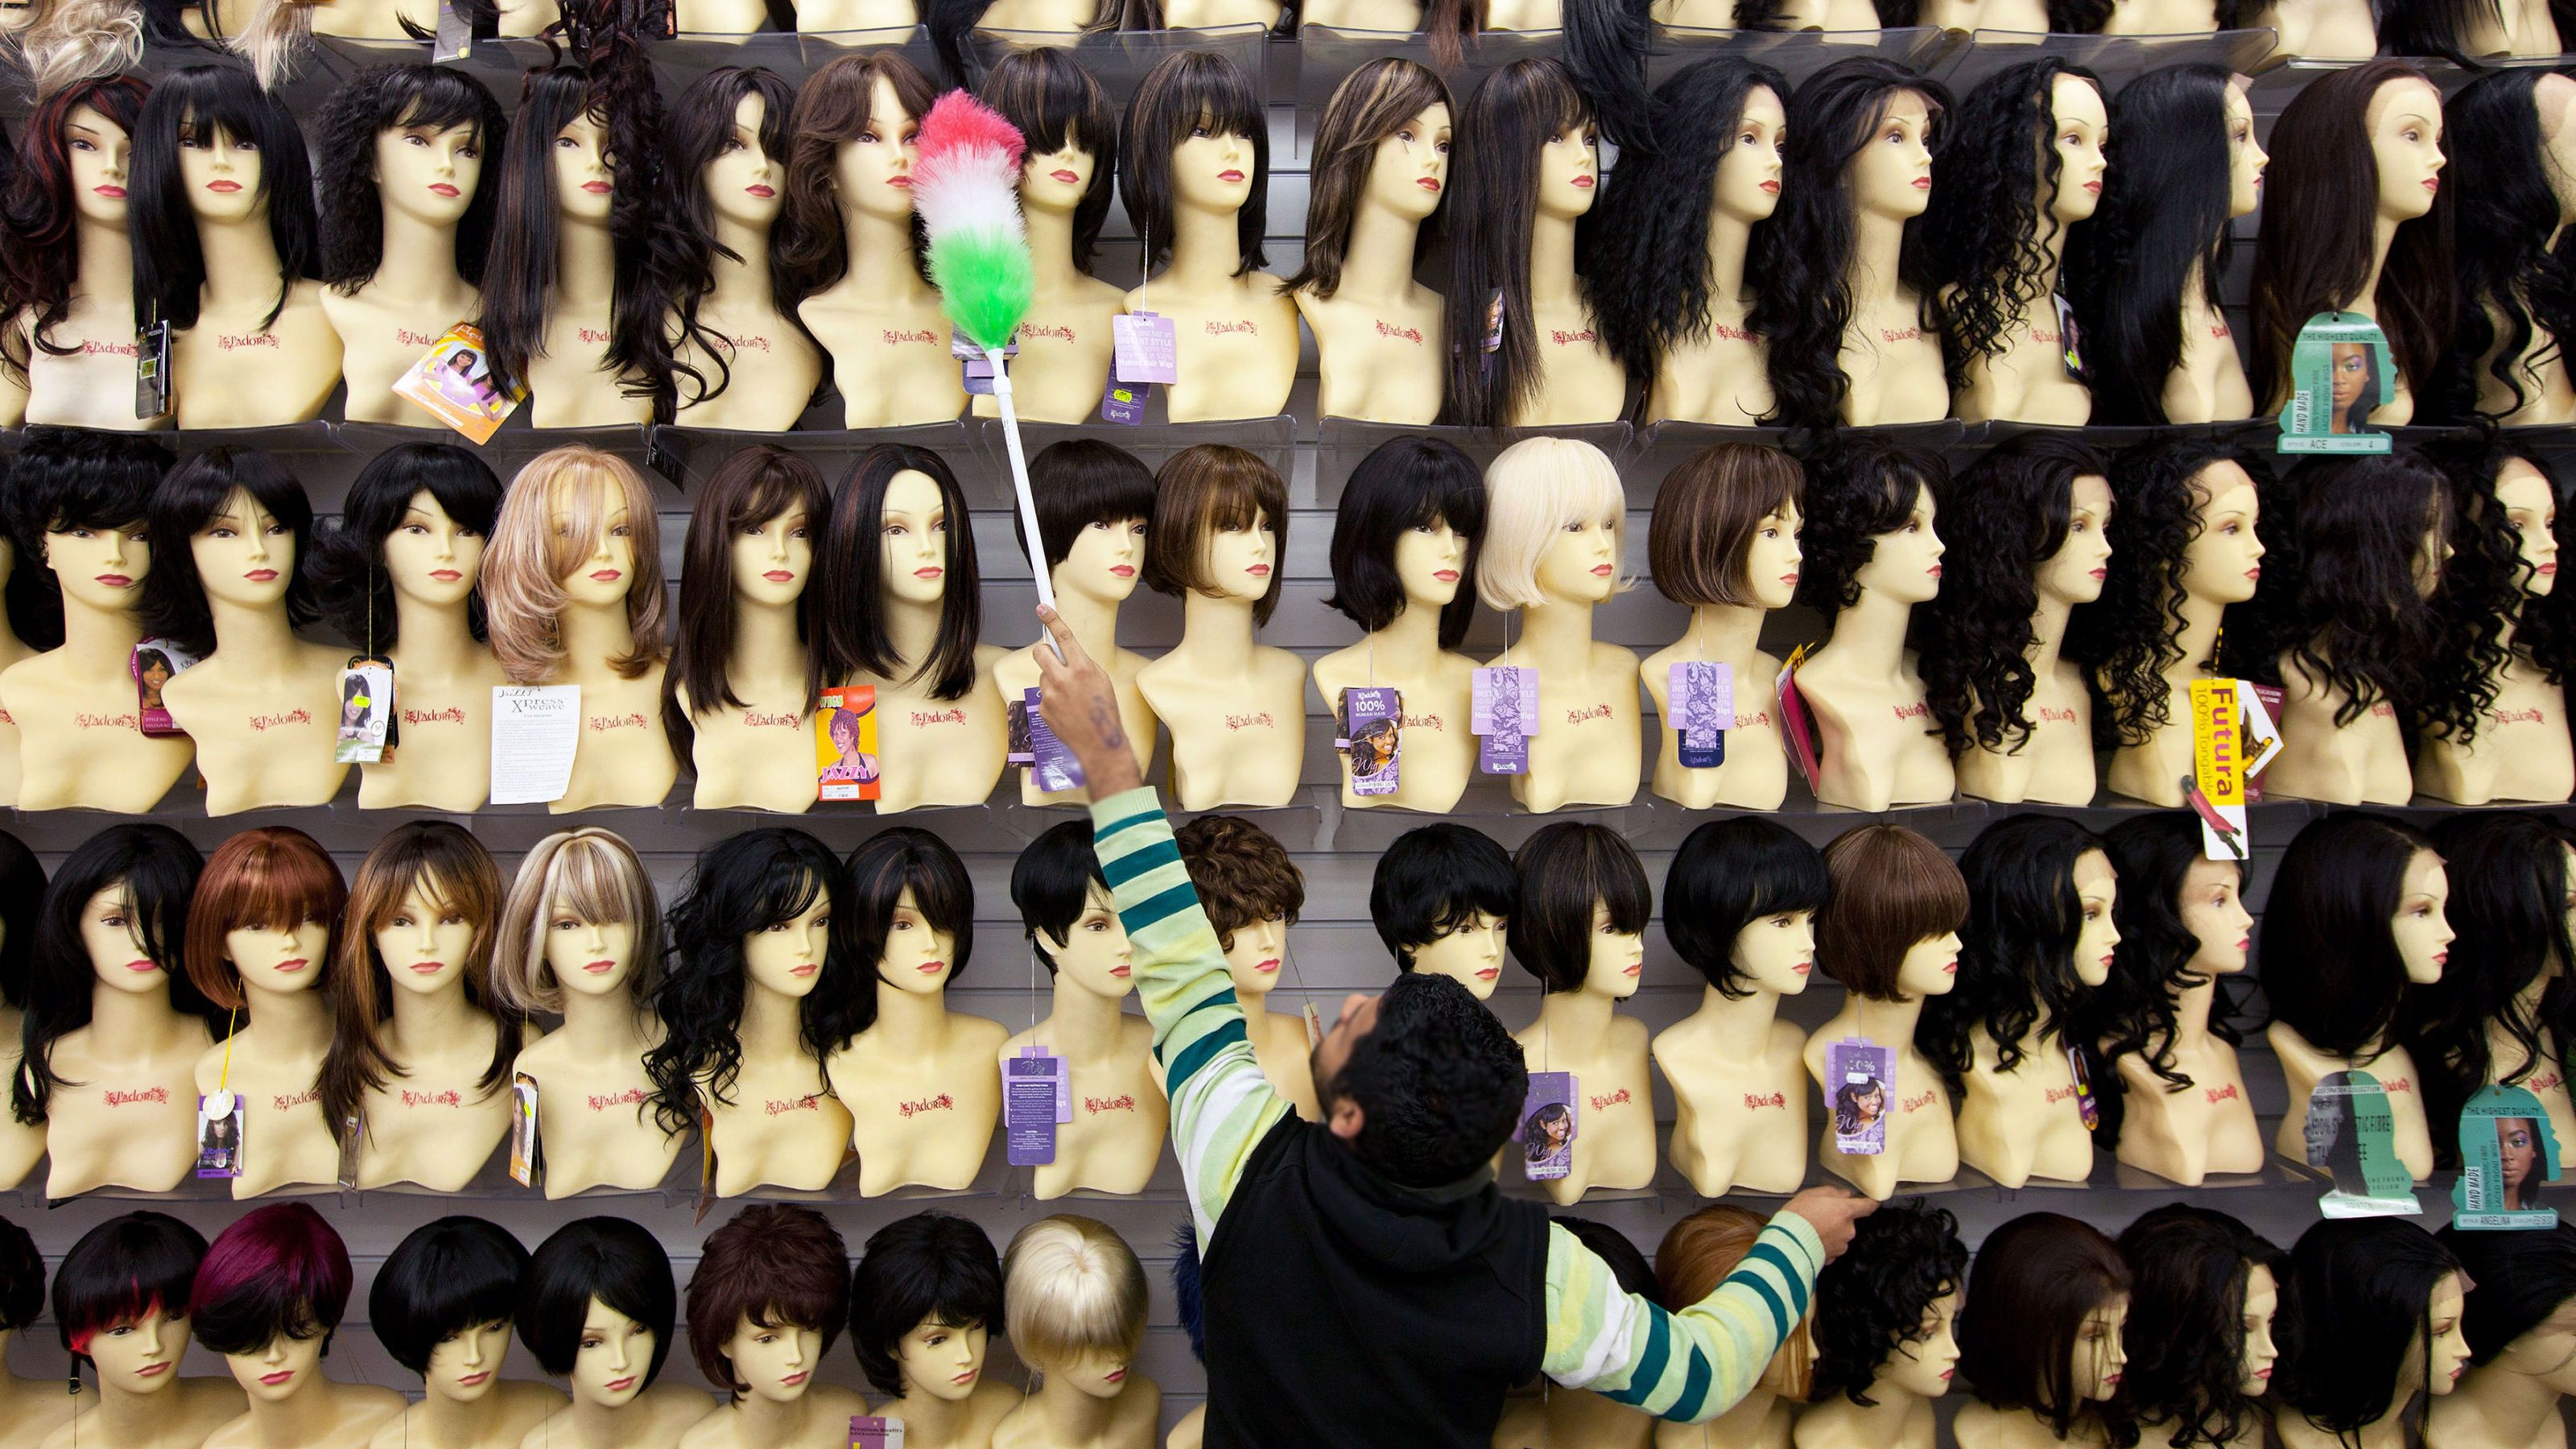 Jewish Orthodox Women and Wig Hair Industry | Marie Claire